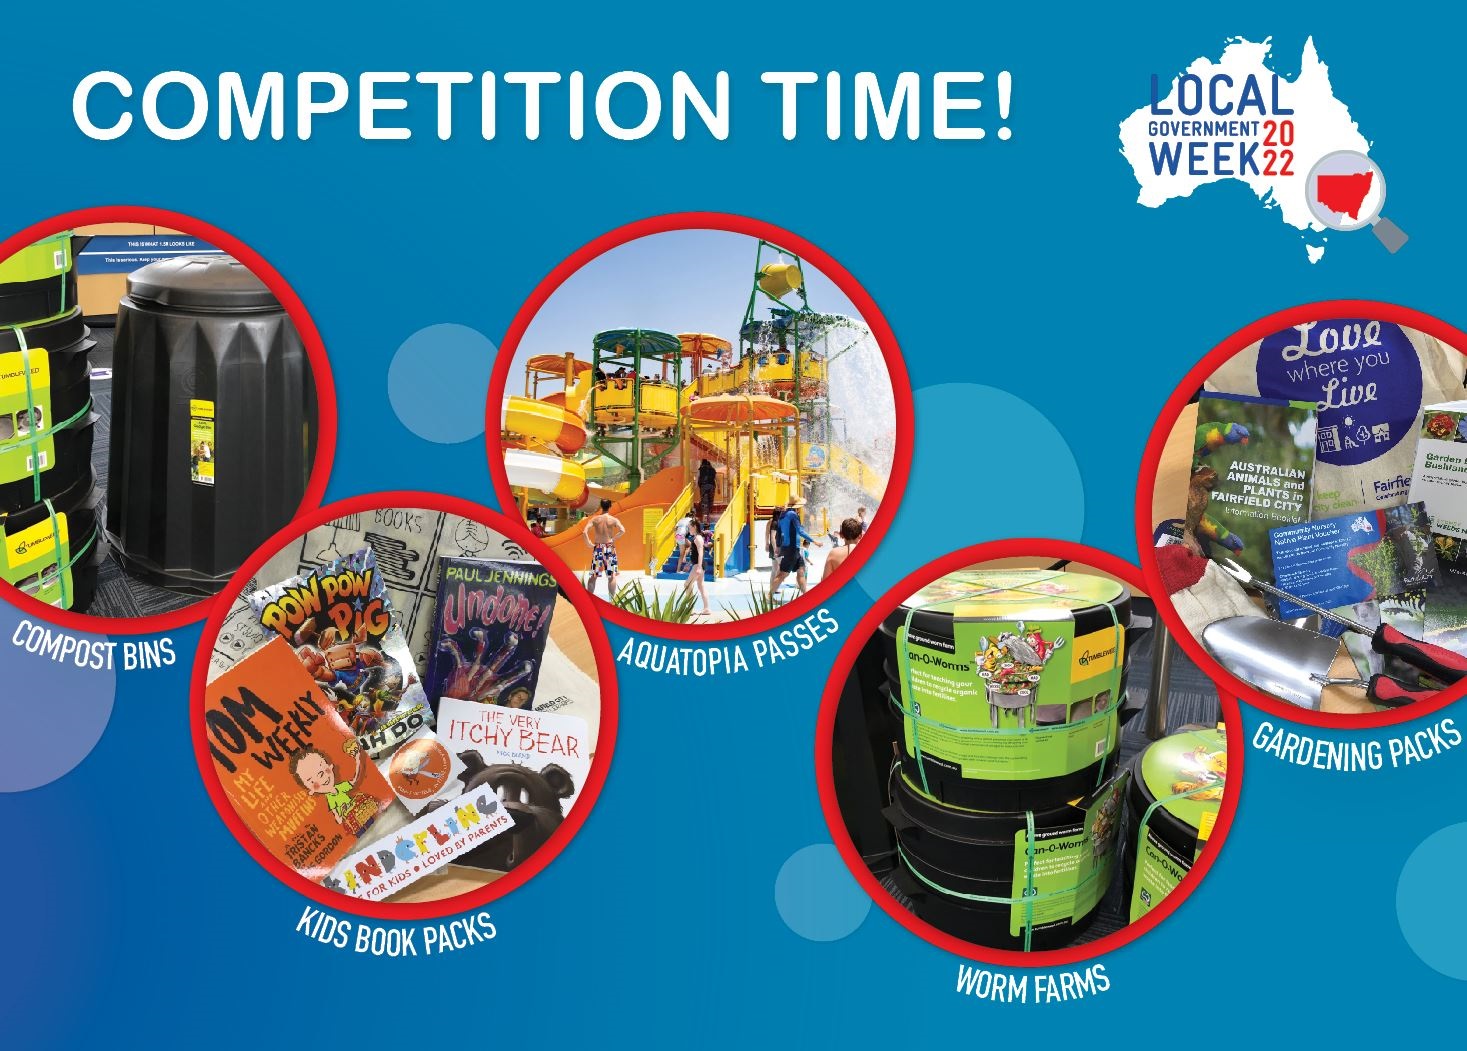 LG Week Competition Time banner featuring photos of compost bins, kids book packs, Aquatopia passes, worm farms and gardening packs